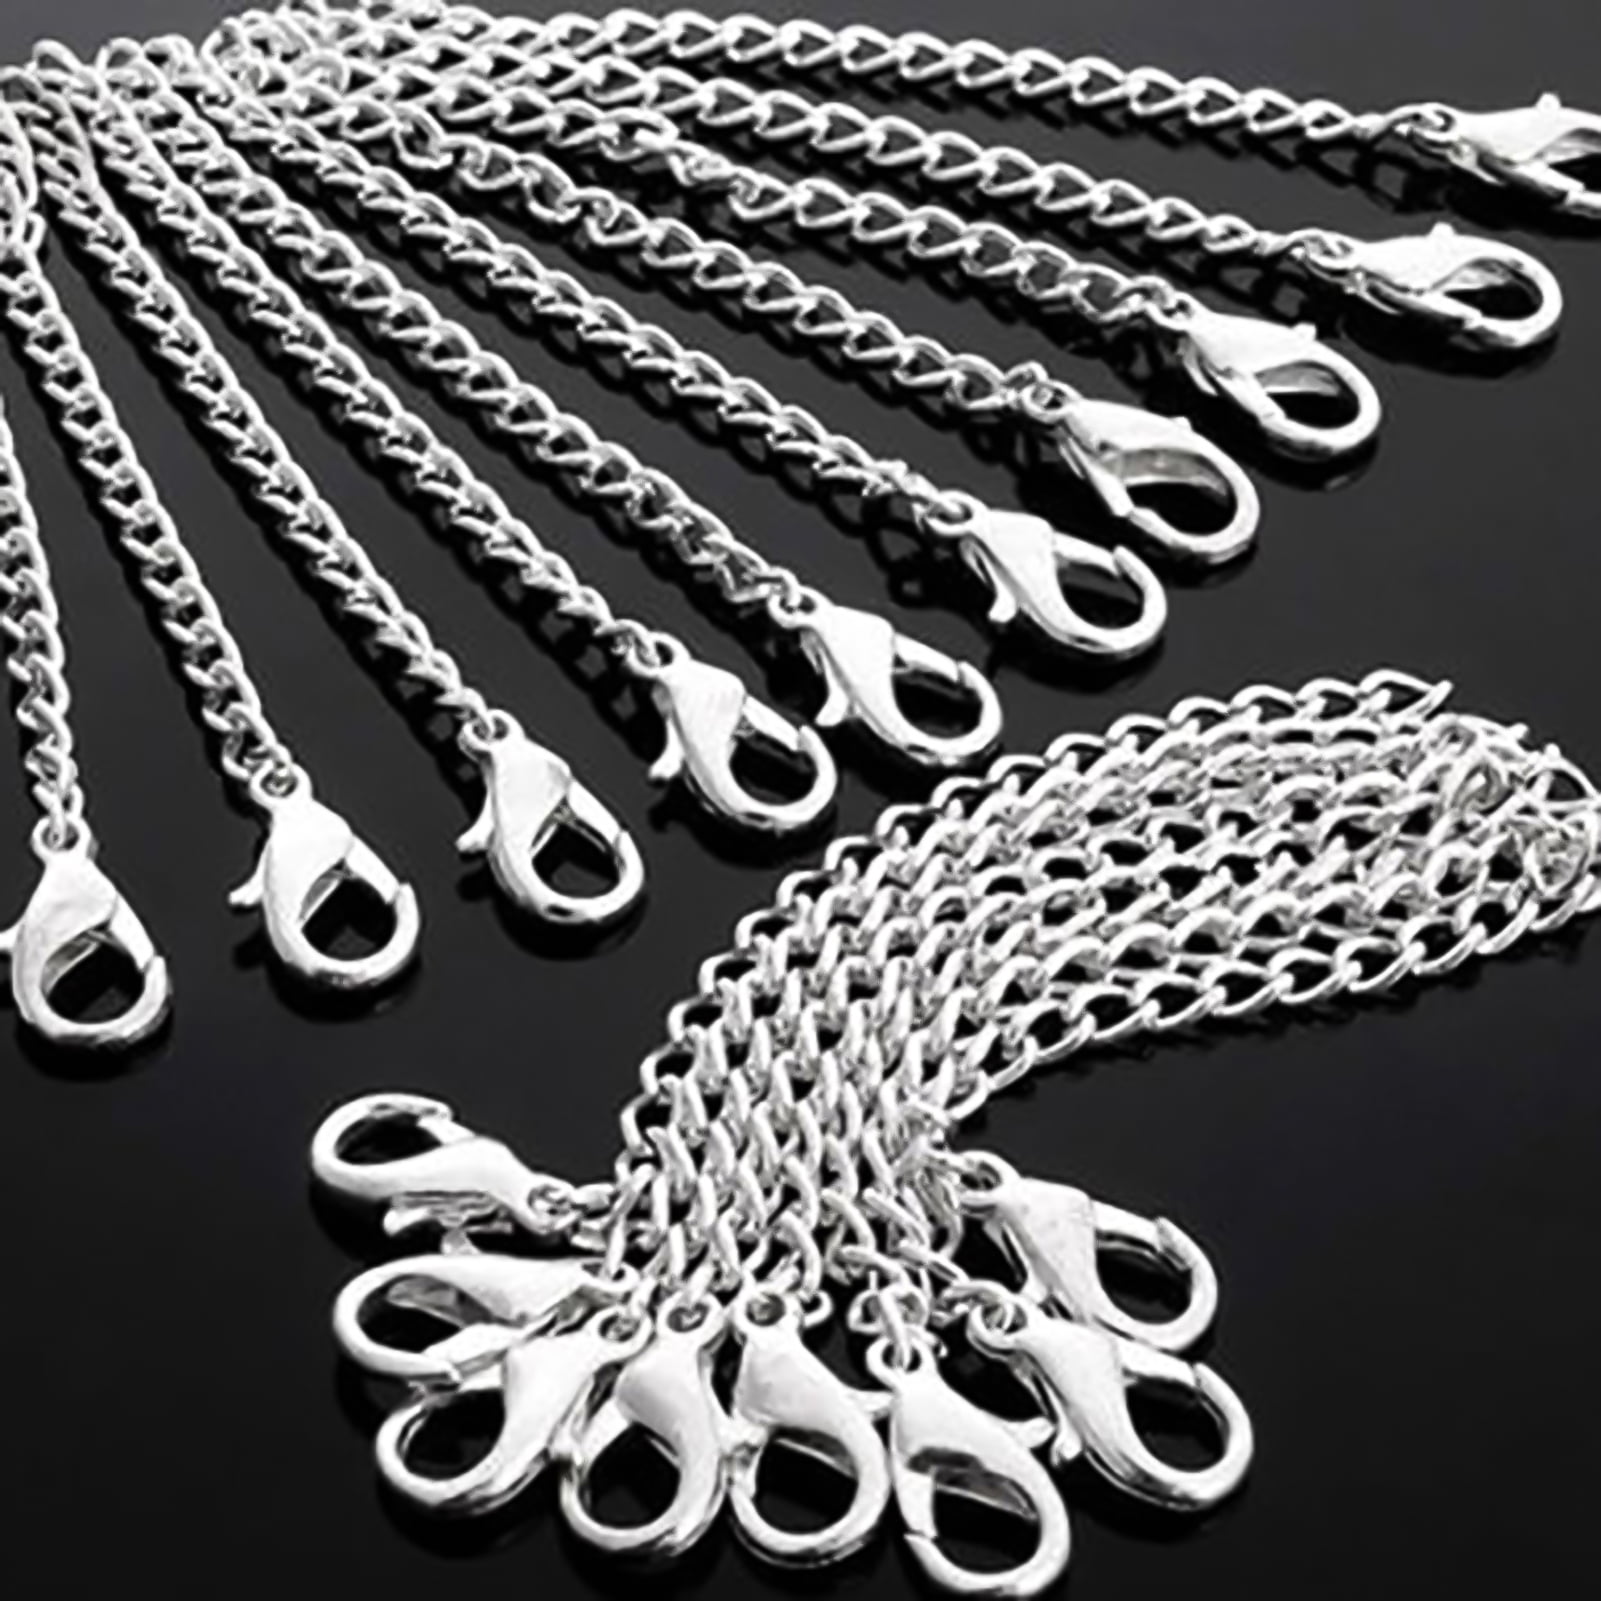 Walbest 20 Pack Silver Plated Necklace Chains Bulk, Cable Chain